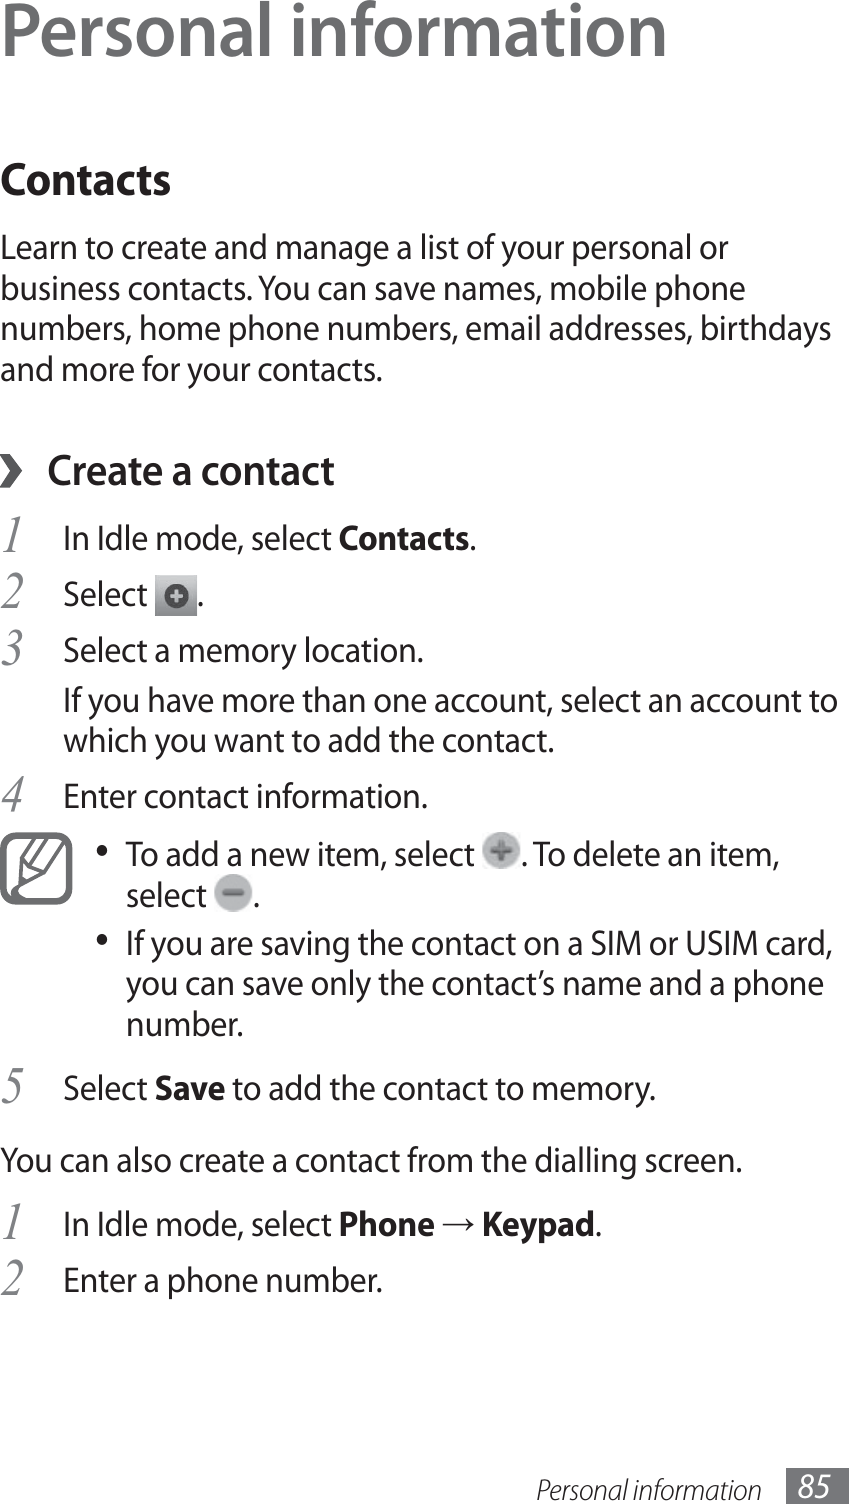 Personal information 85Personal informationContactsLearn to create and manage a list of your personal or business contacts. You can save names, mobile phone numbers, home phone numbers, email addresses, birthdays and more for your contacts. ›Create a contactIn Idle mode, select 1 Contacts.Select 2 .Select a memory location.3 If you have more than one account, select an account to which you want to add the contact.Enter contact information.4 To add a new item, select •  . To delete an item, select  .If you are saving the contact on a SIM or USIM card, • you can save only the contact’s name and a phone number.Select 5 Save to add the contact to memory.You can also create a contact from the dialling screen.In Idle mode, select 1 Phone → Keypad.Enter a phone number.2 